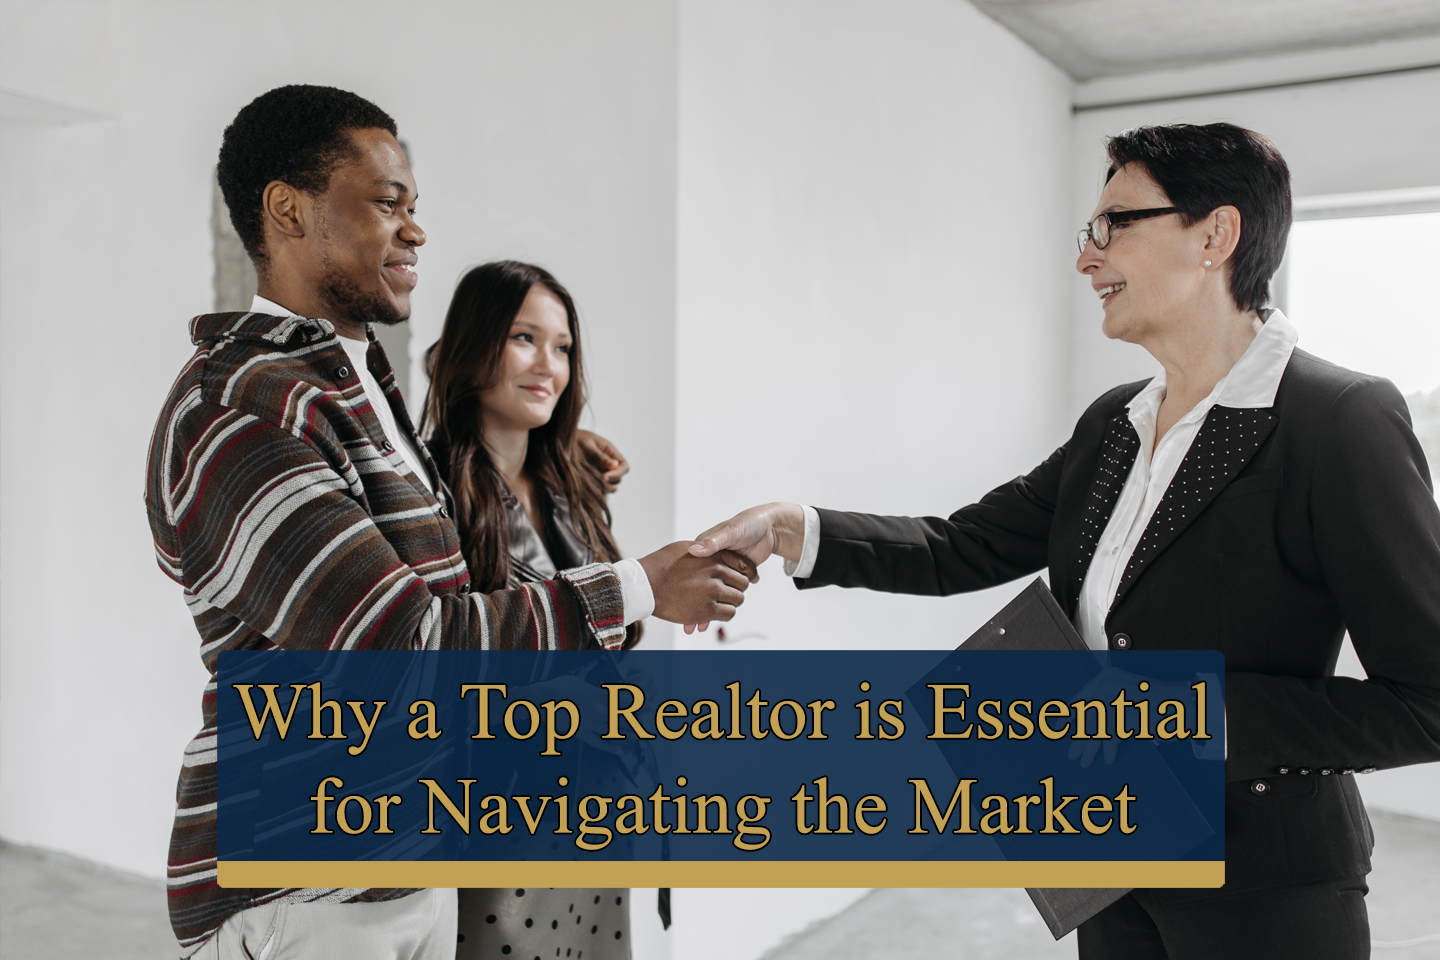 Why a top realtor is essential for navigating the market